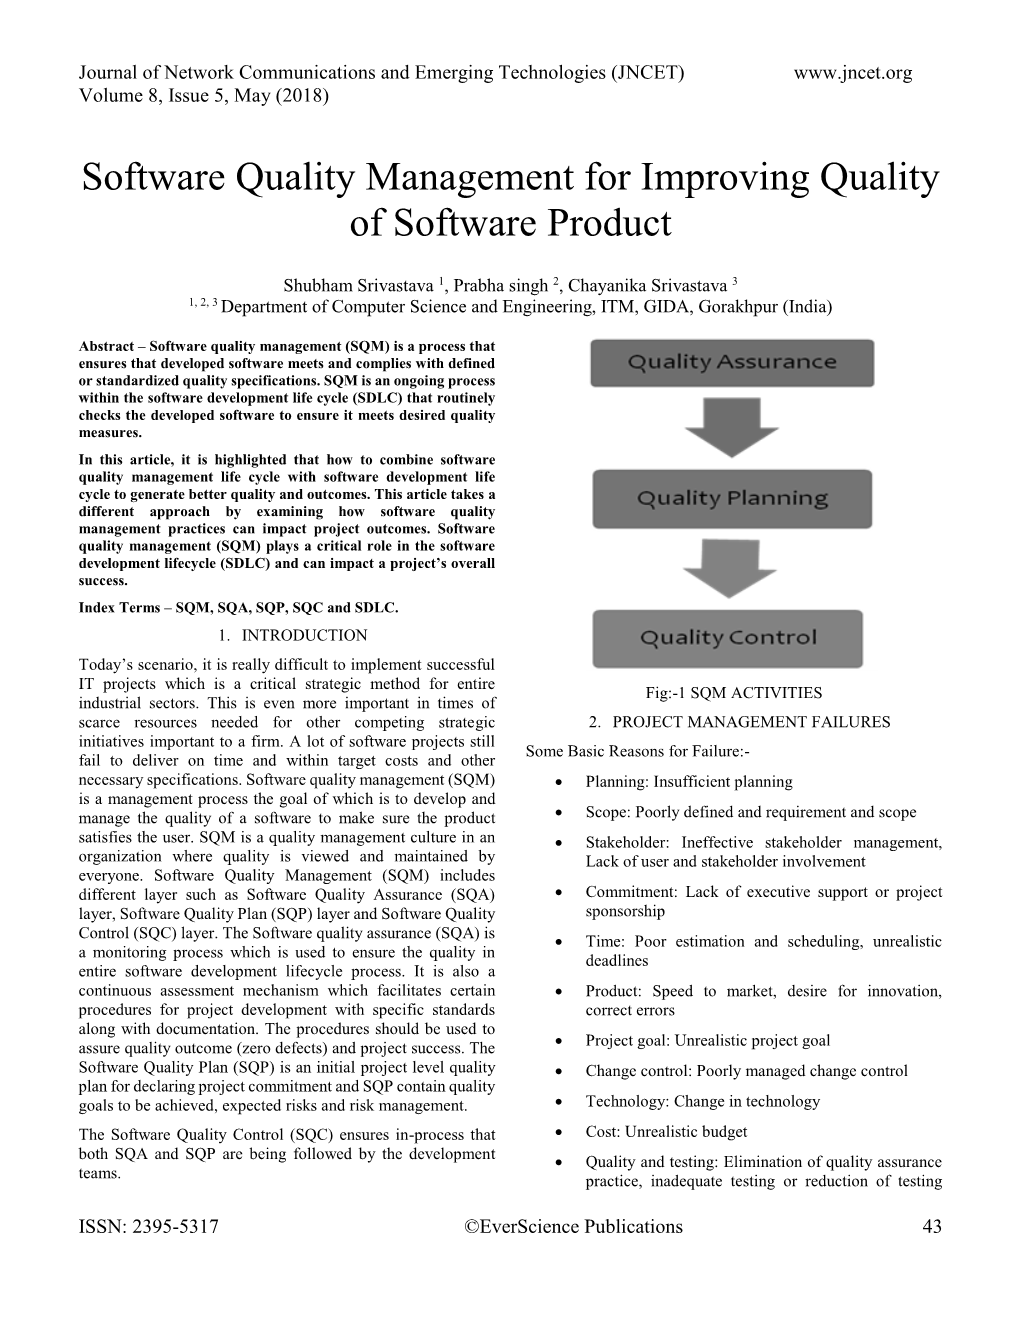 Software Quality Management for Improving Quality of Software Product